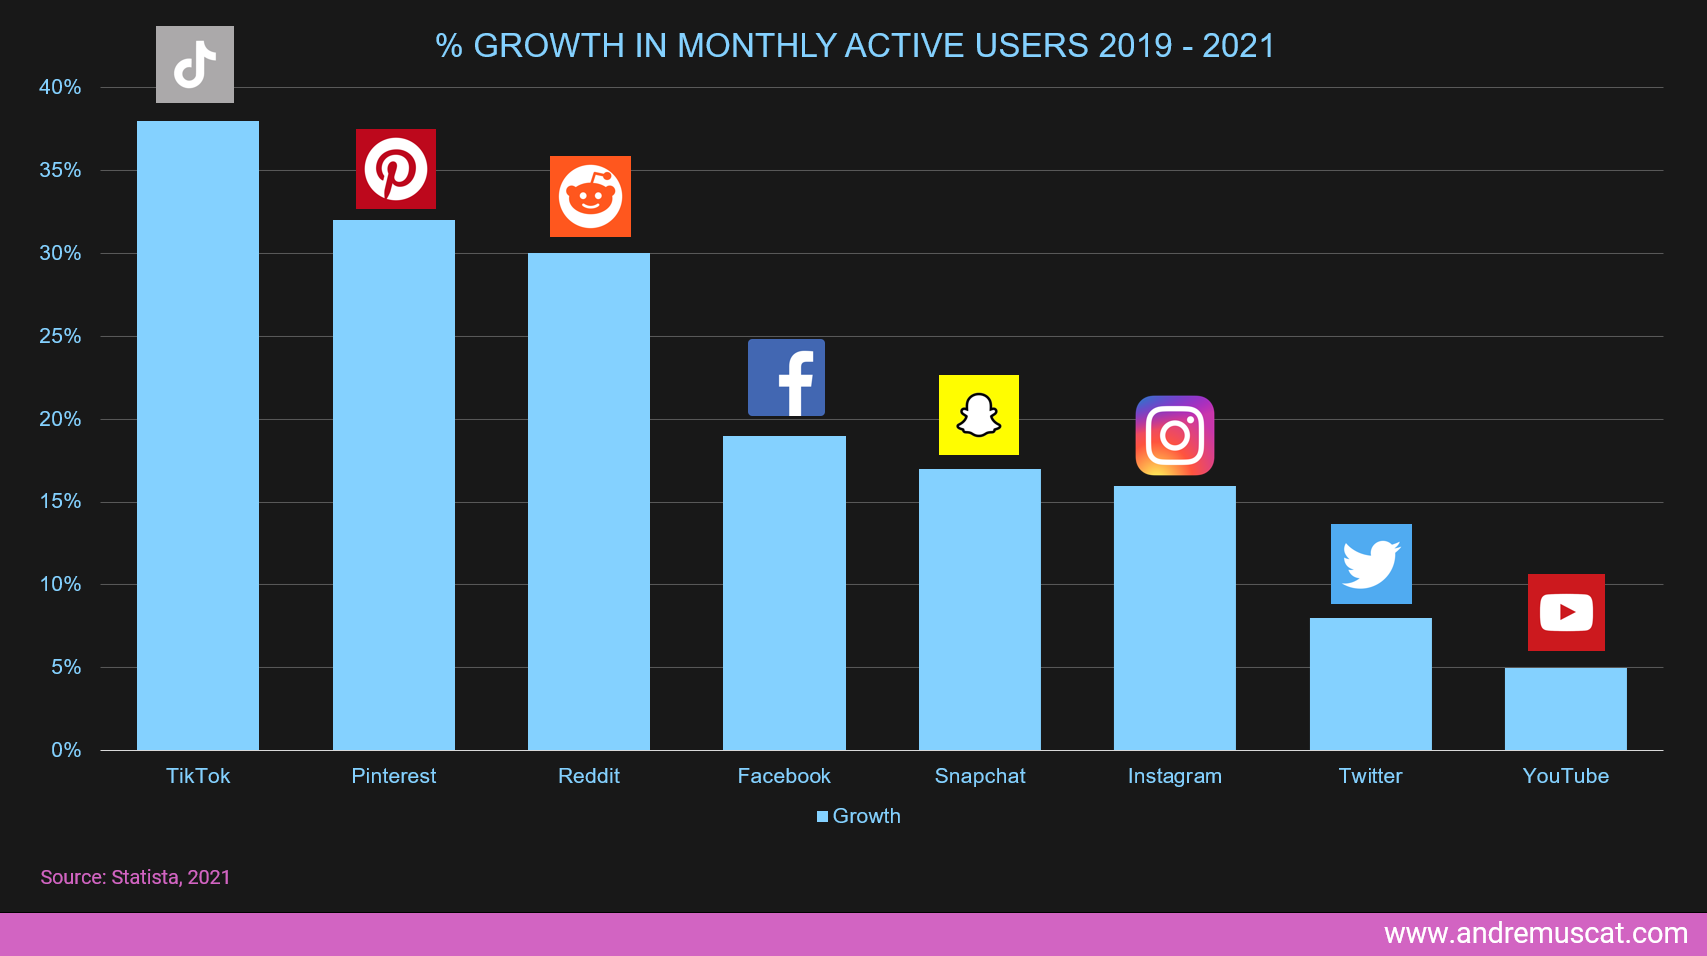 Table: % Growth in monthly active users 2019 - 2021